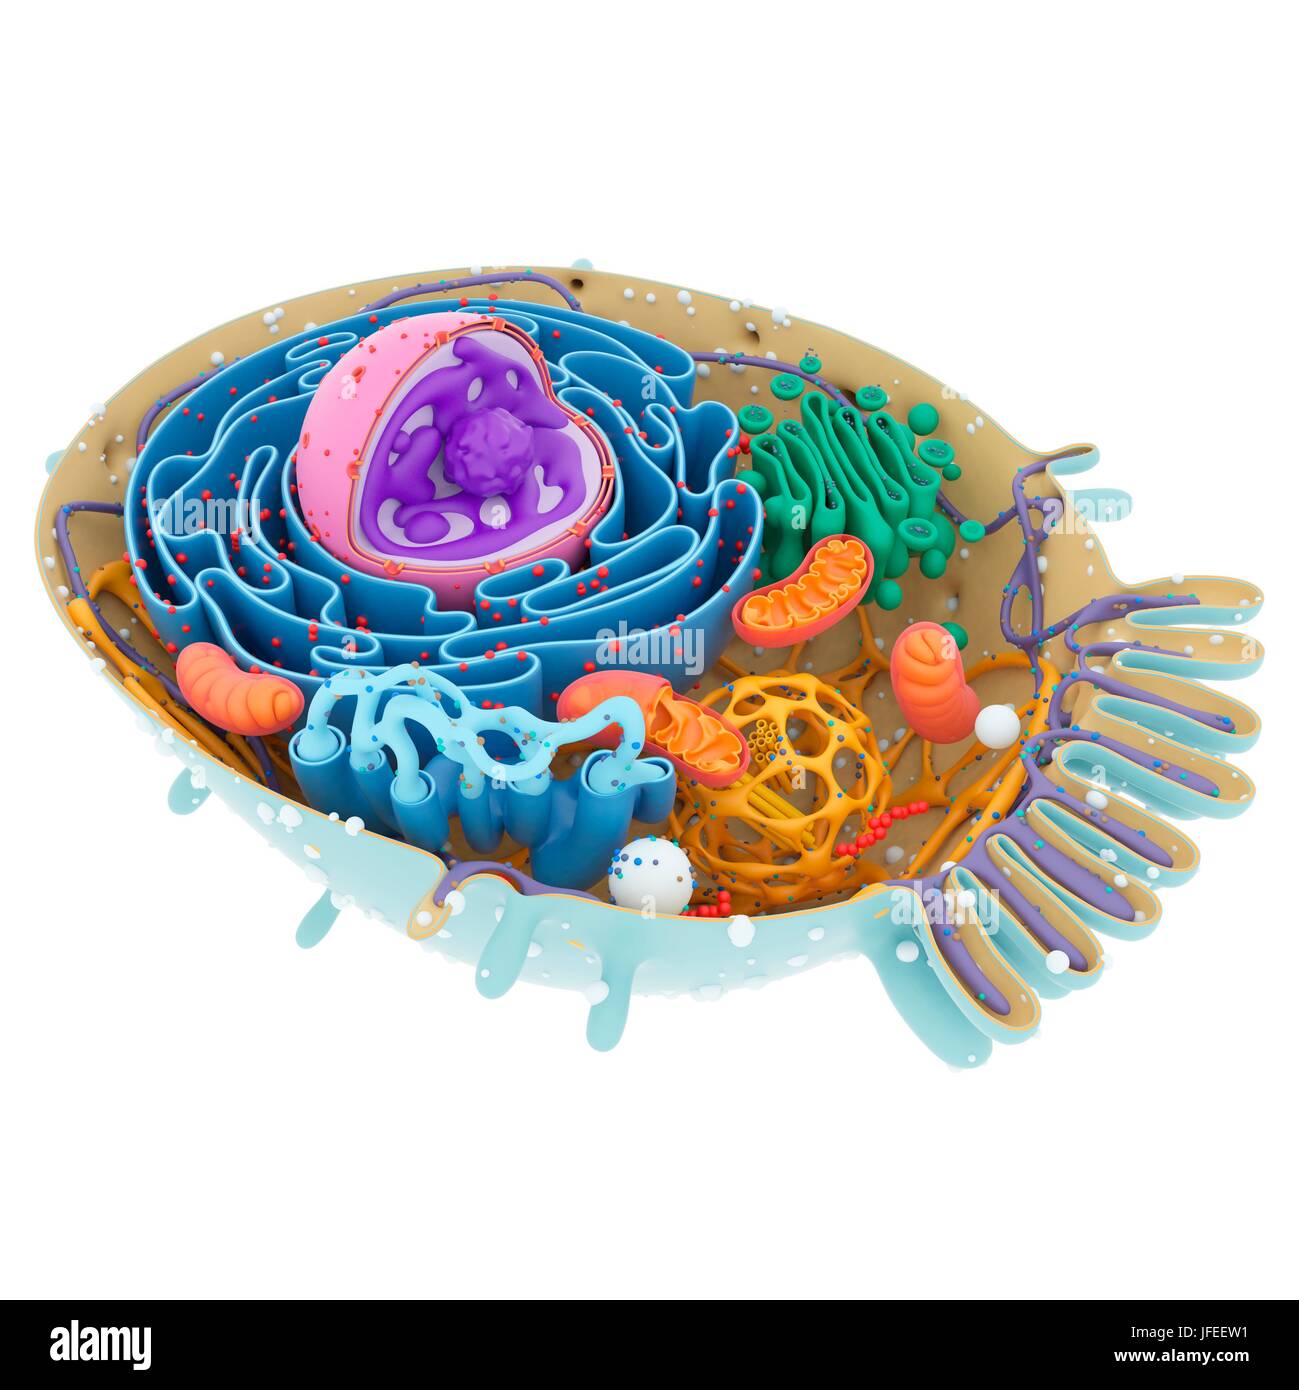 Cell structure, illustration. Stock Photo